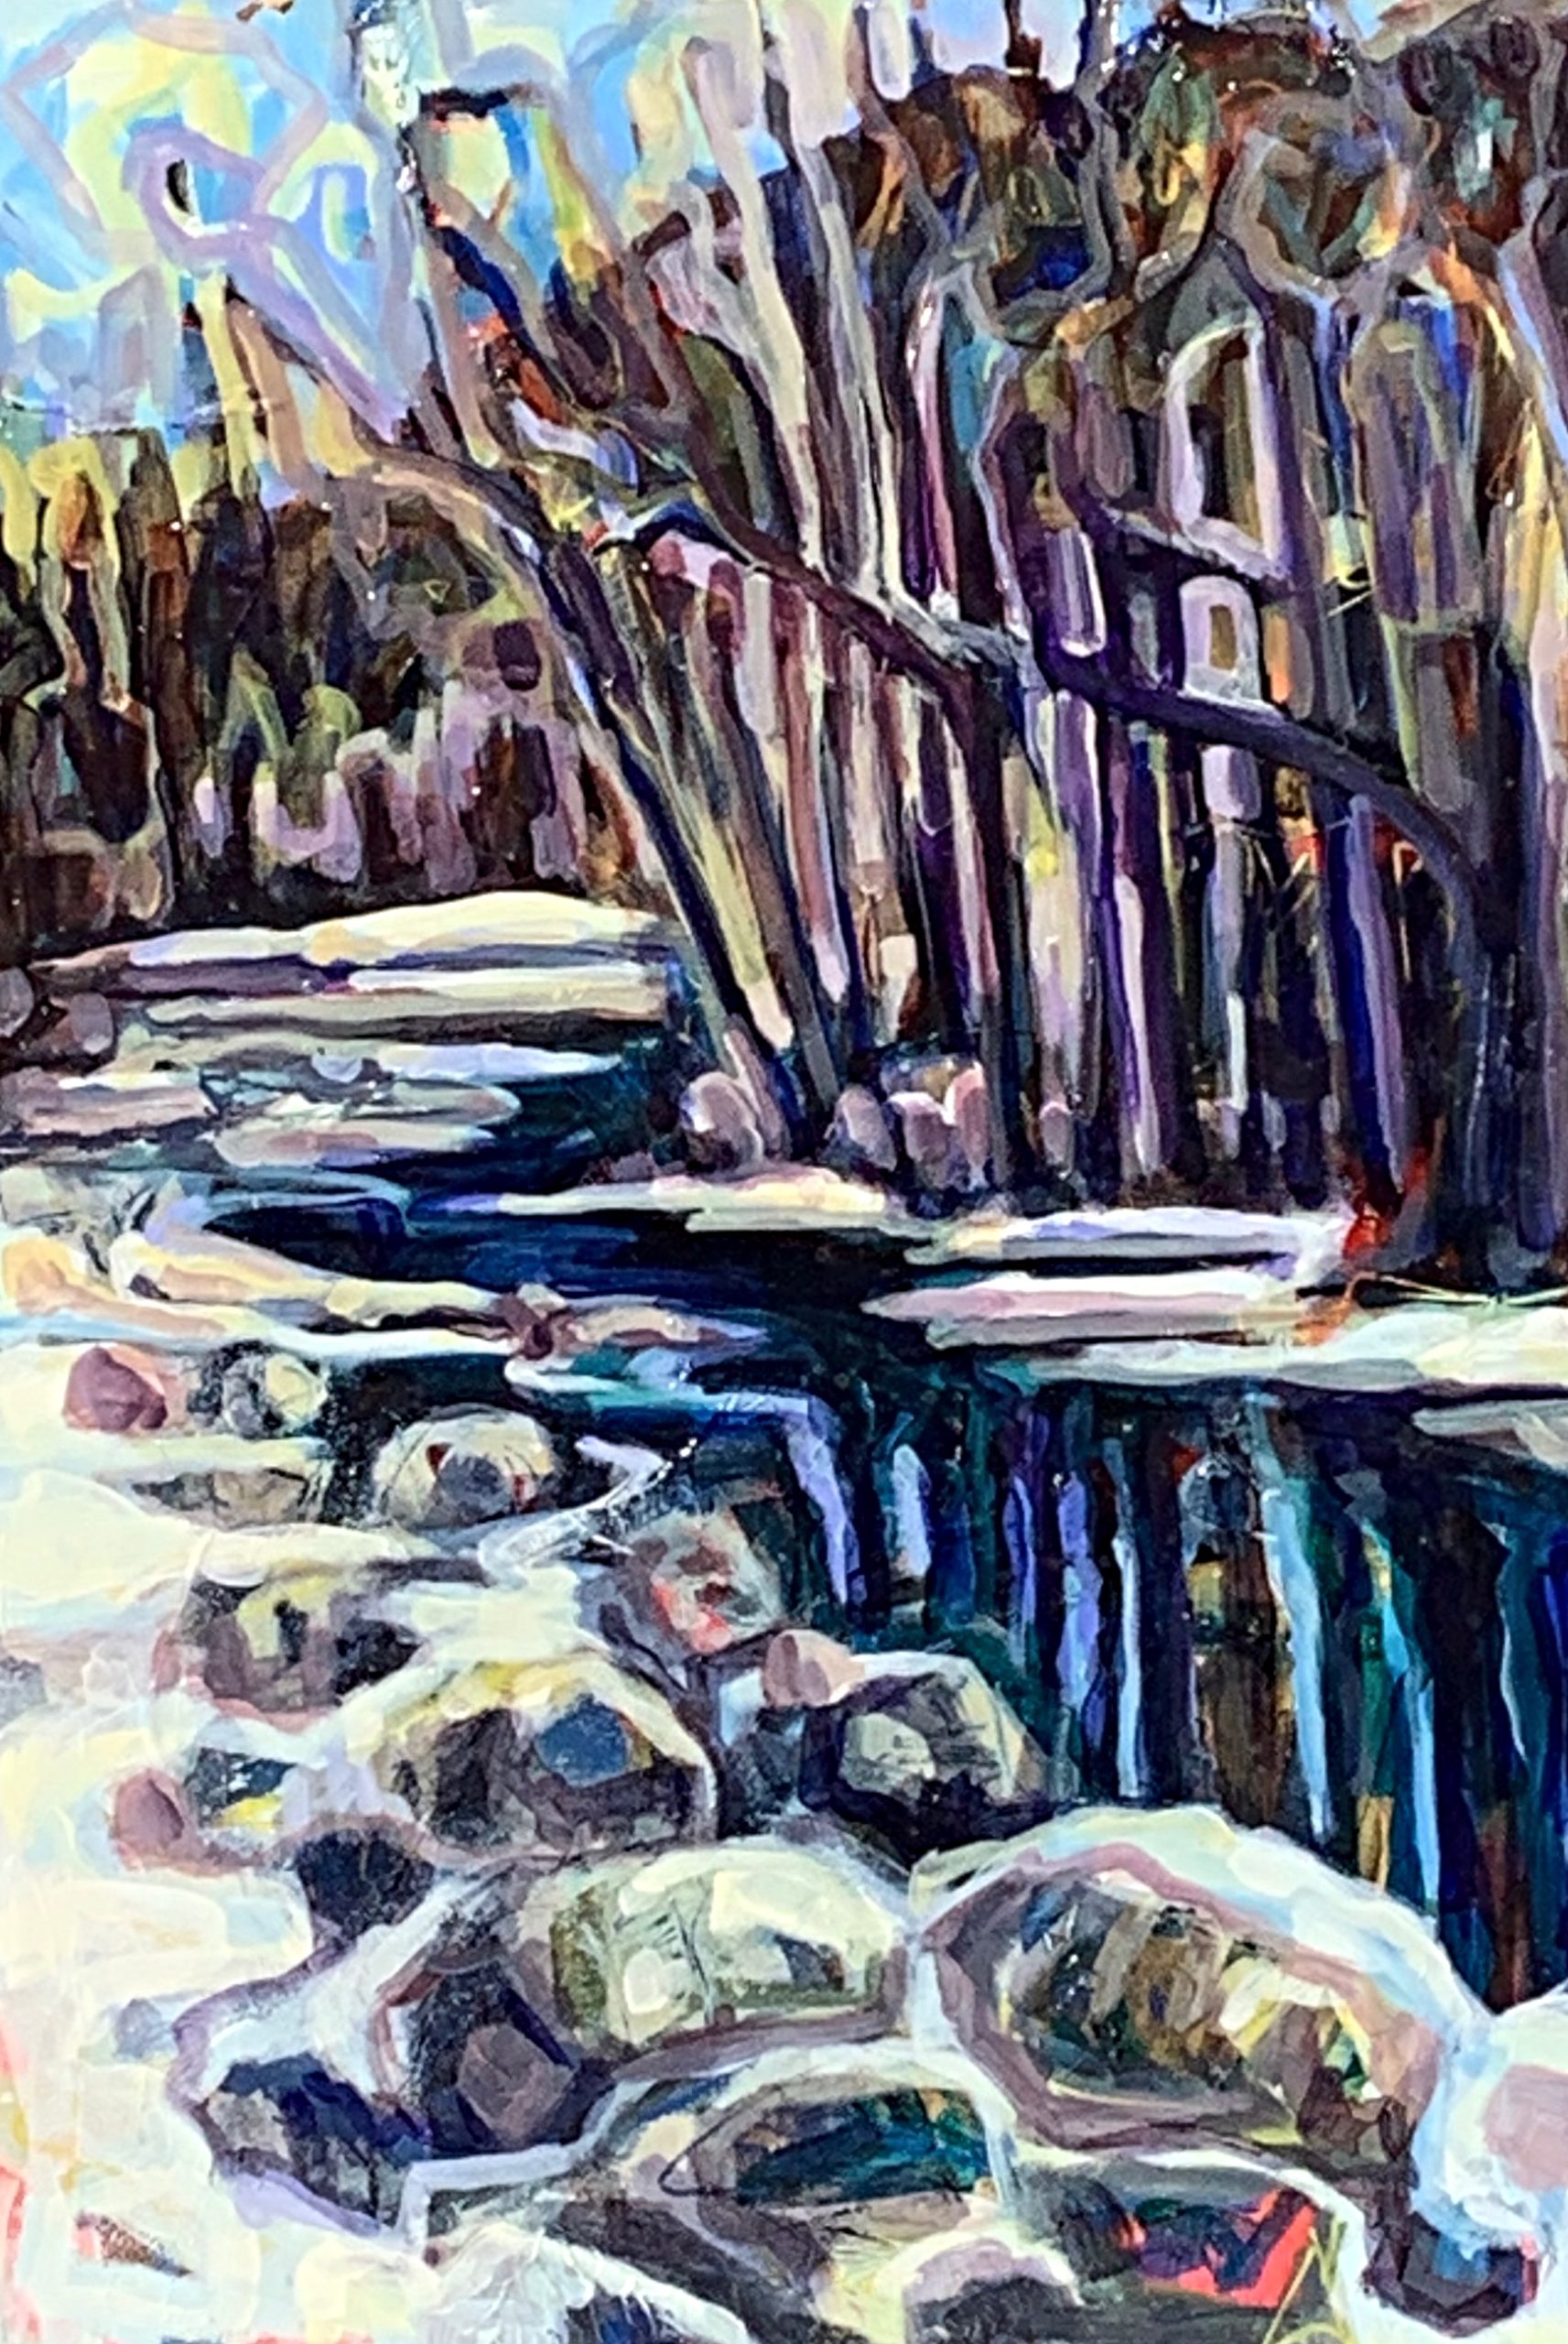 Upstream, acrylic landscape painting by Sandy Kunze | Effusion Art Gallery + Cast Glass Studio, Invermere BC